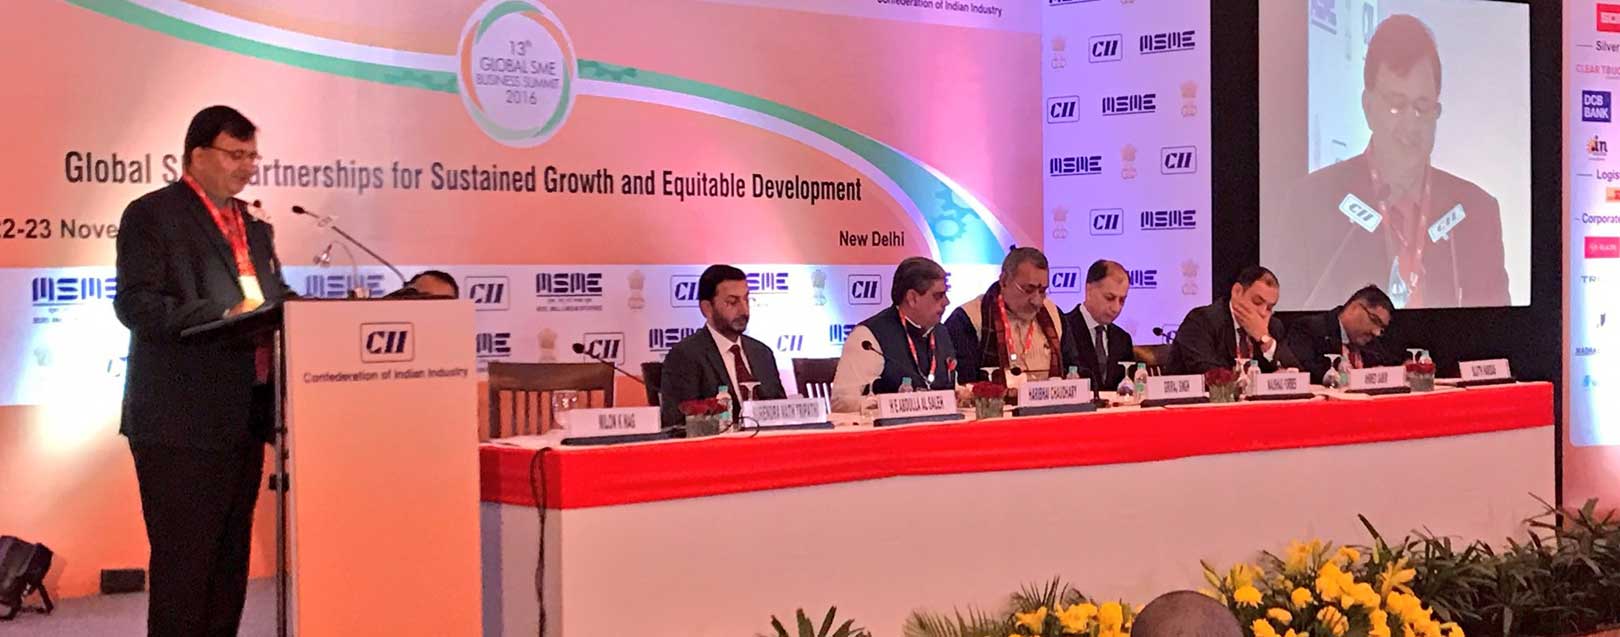 MSMEs in India need to reposition due to global challenges : Global SME Summit 2016